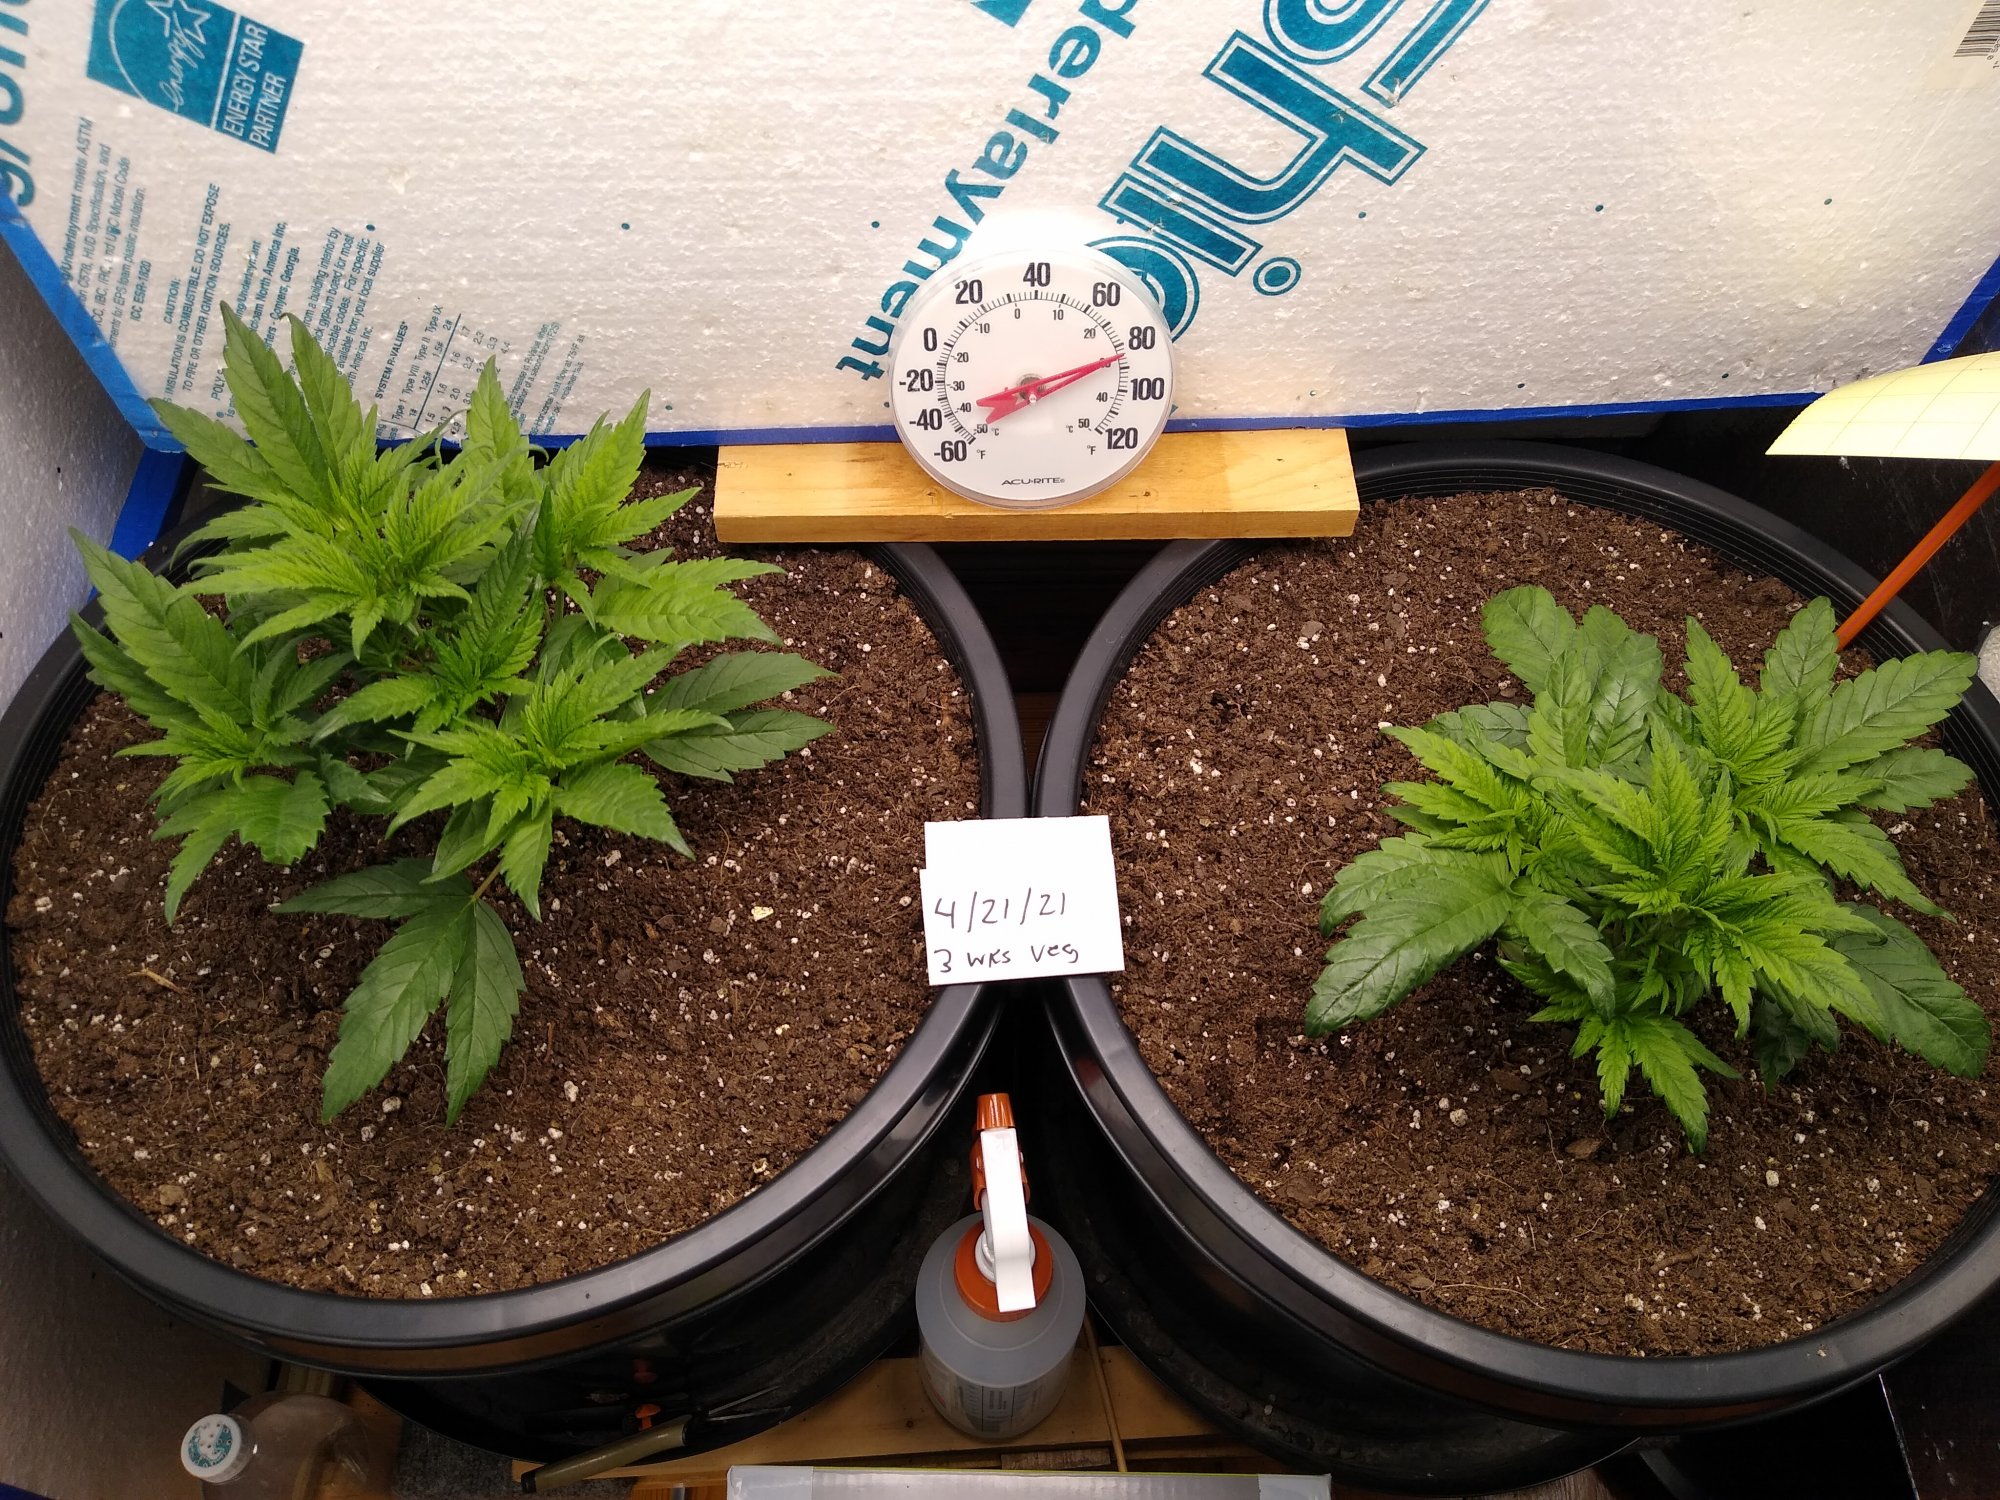 Bag seed grow well they actually  were in  a  plastic  vial 3